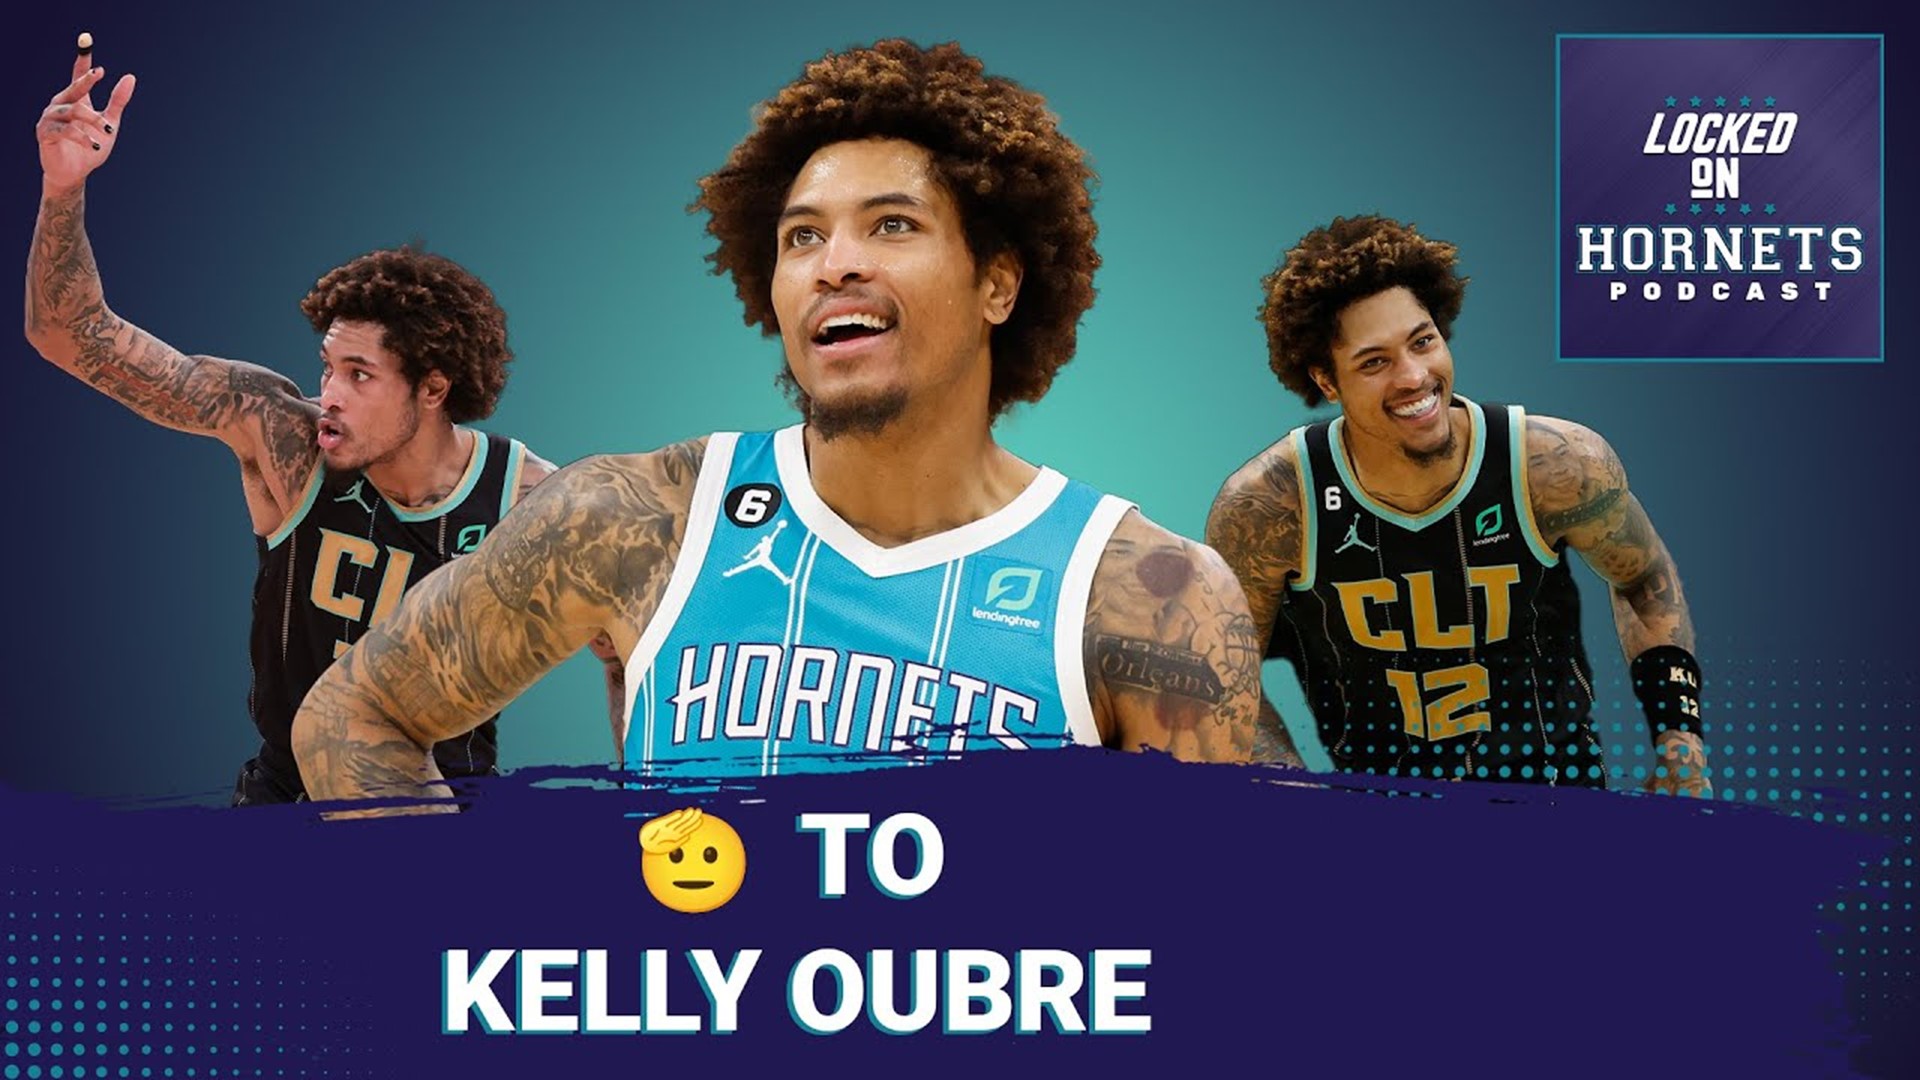 Kelly Oubre signs with the Philadelphia 76ers. What does it mean for the Charlotte Hornets?